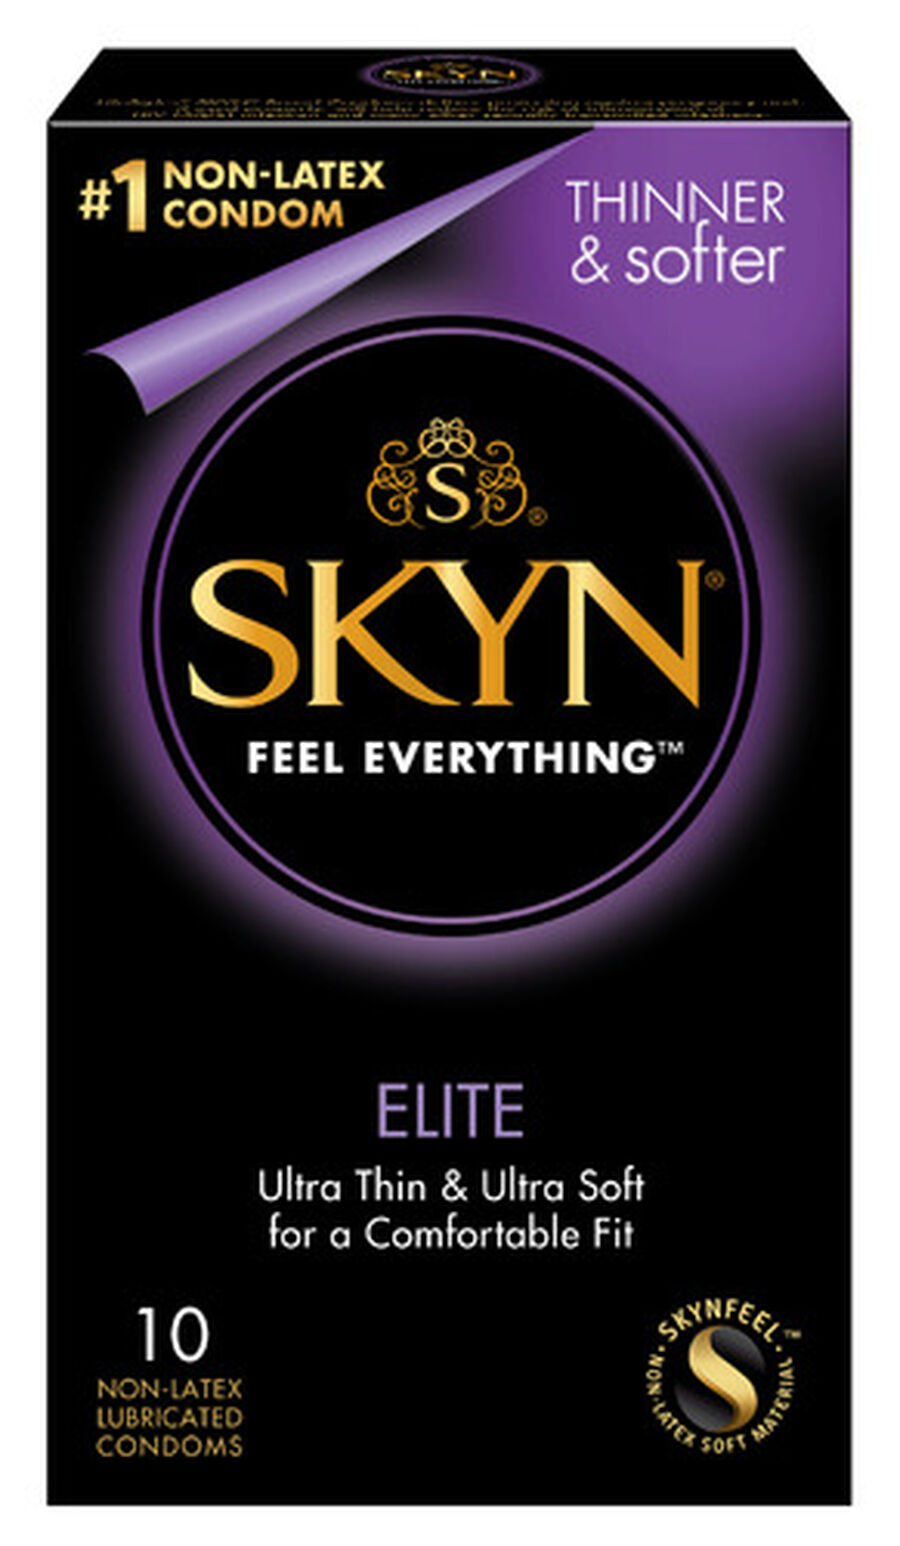 LifeStyles SKYN Elite Non-Latex Condoms, 3 ct., , large image number 1